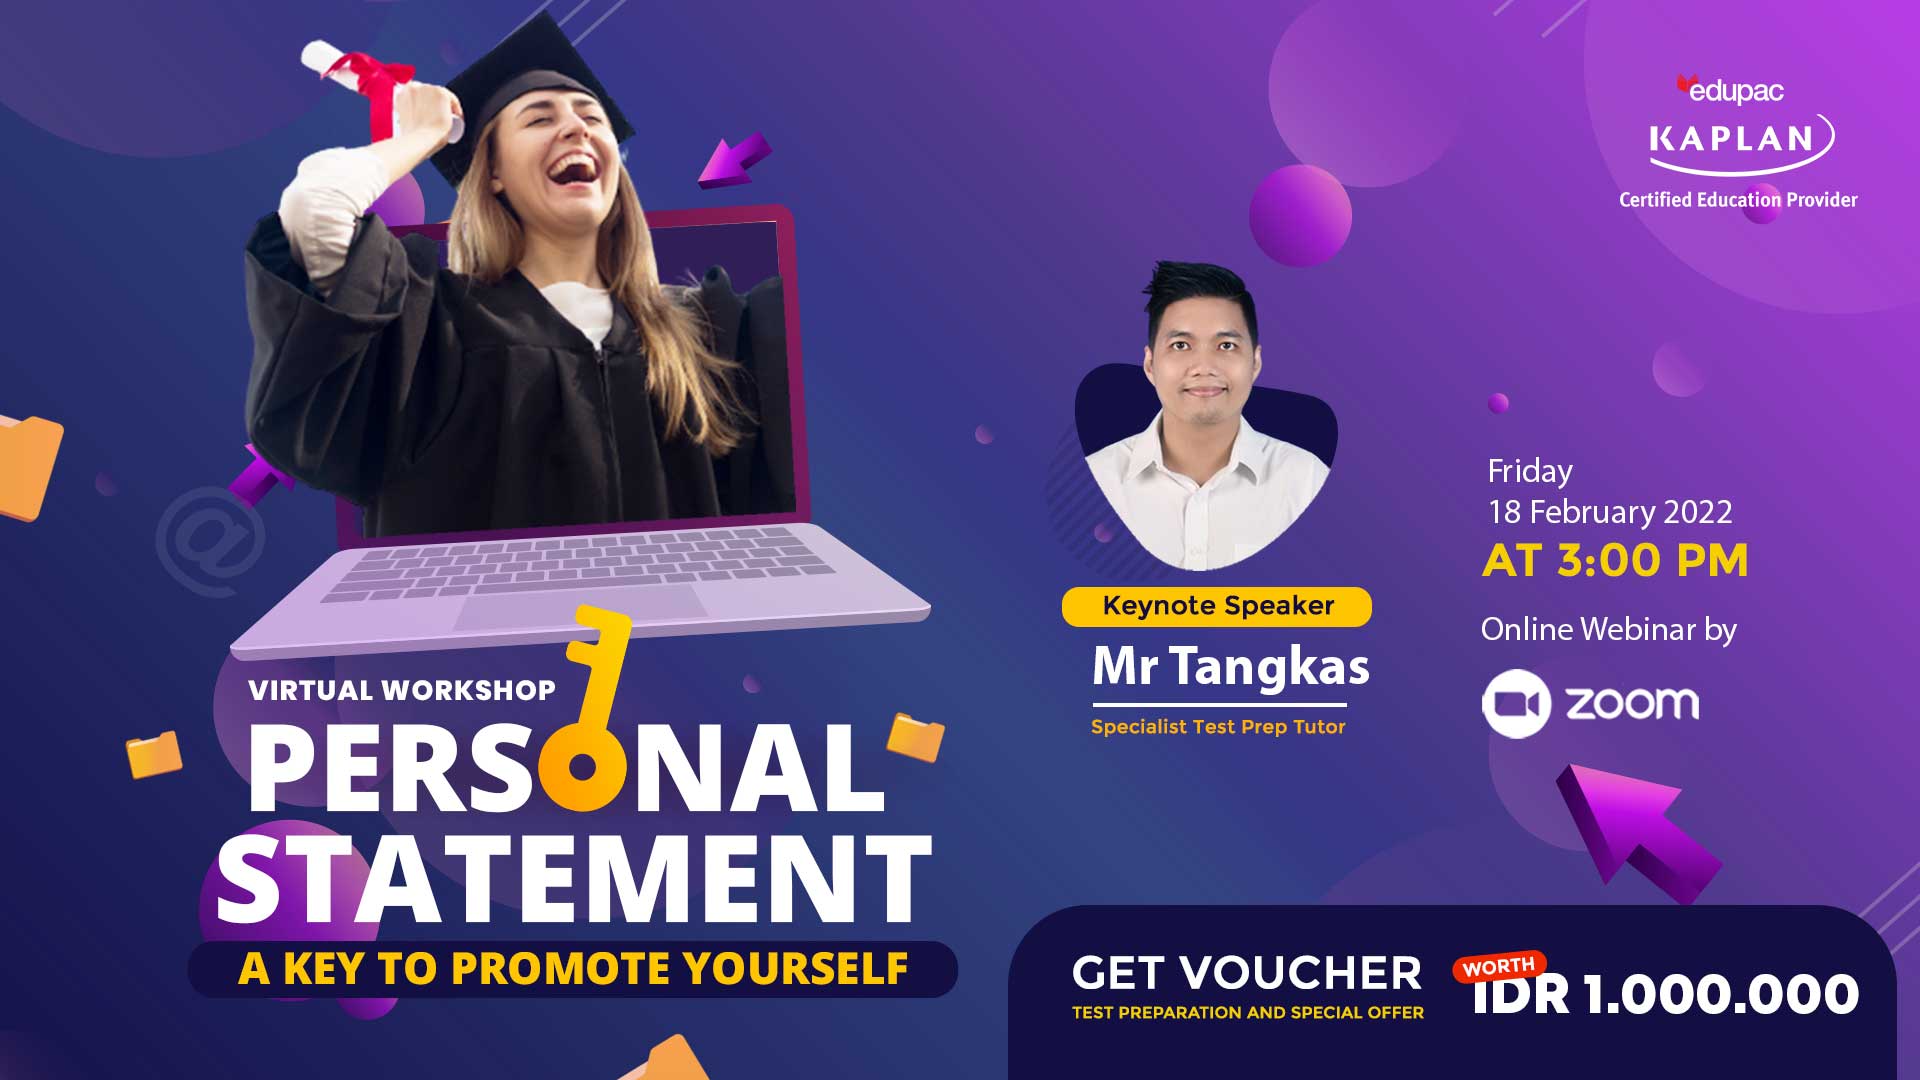 Webinar: FREE Virtual Workshop "Personal Statement a Key to Promote Yourself" 